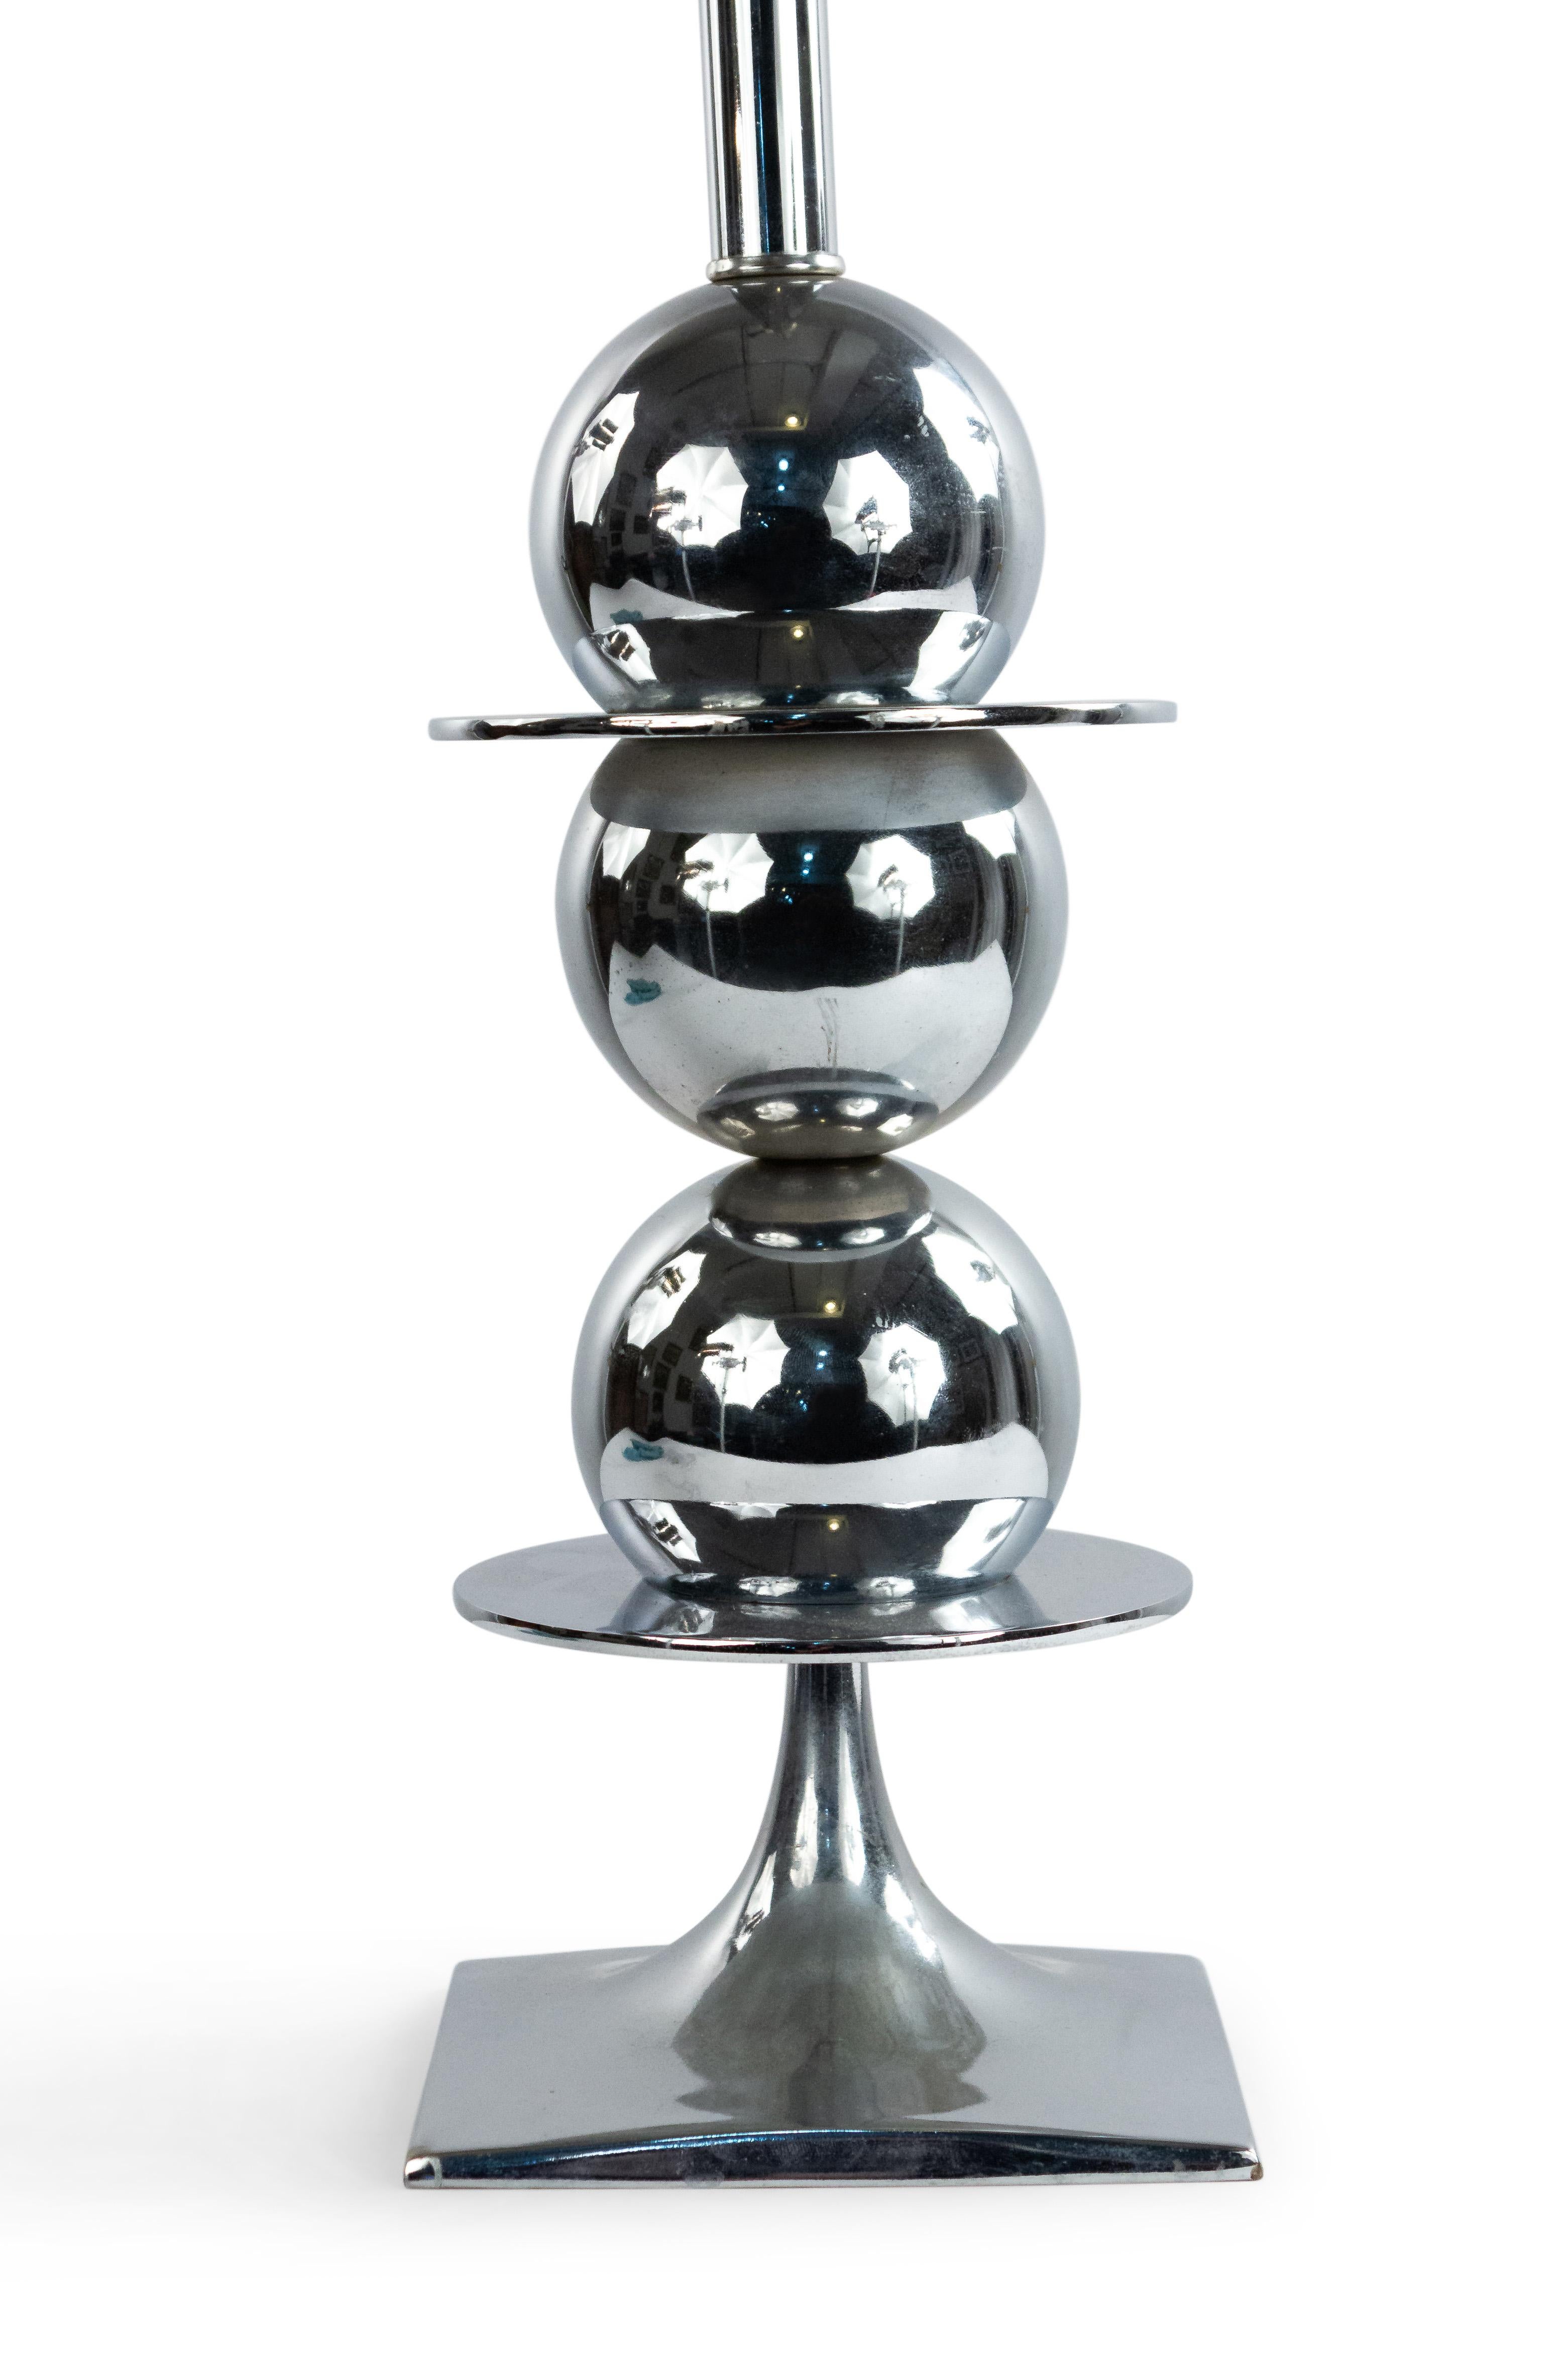 American midcentury chrome table lamp composed of discs and spheres on a square base.